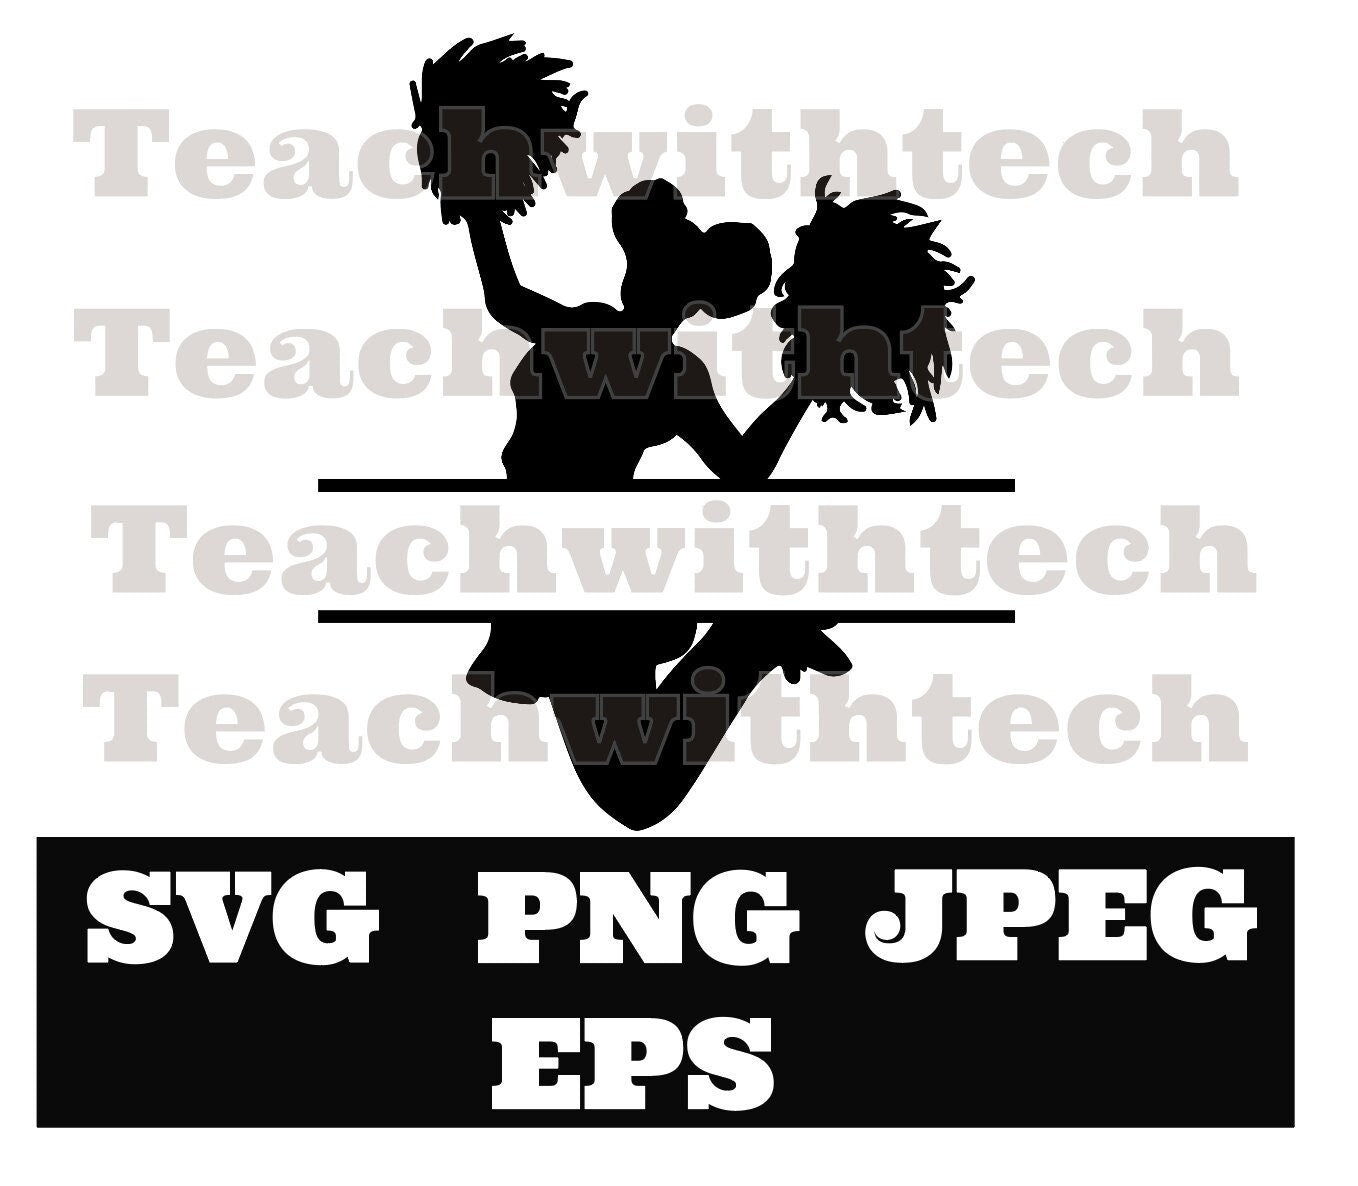 Cheerleader Silhouette Jumping in Air Poms Split Name Frame Download svg png SVG - Cricut - Cheerleader Cut Files - Silhouette Cut Files